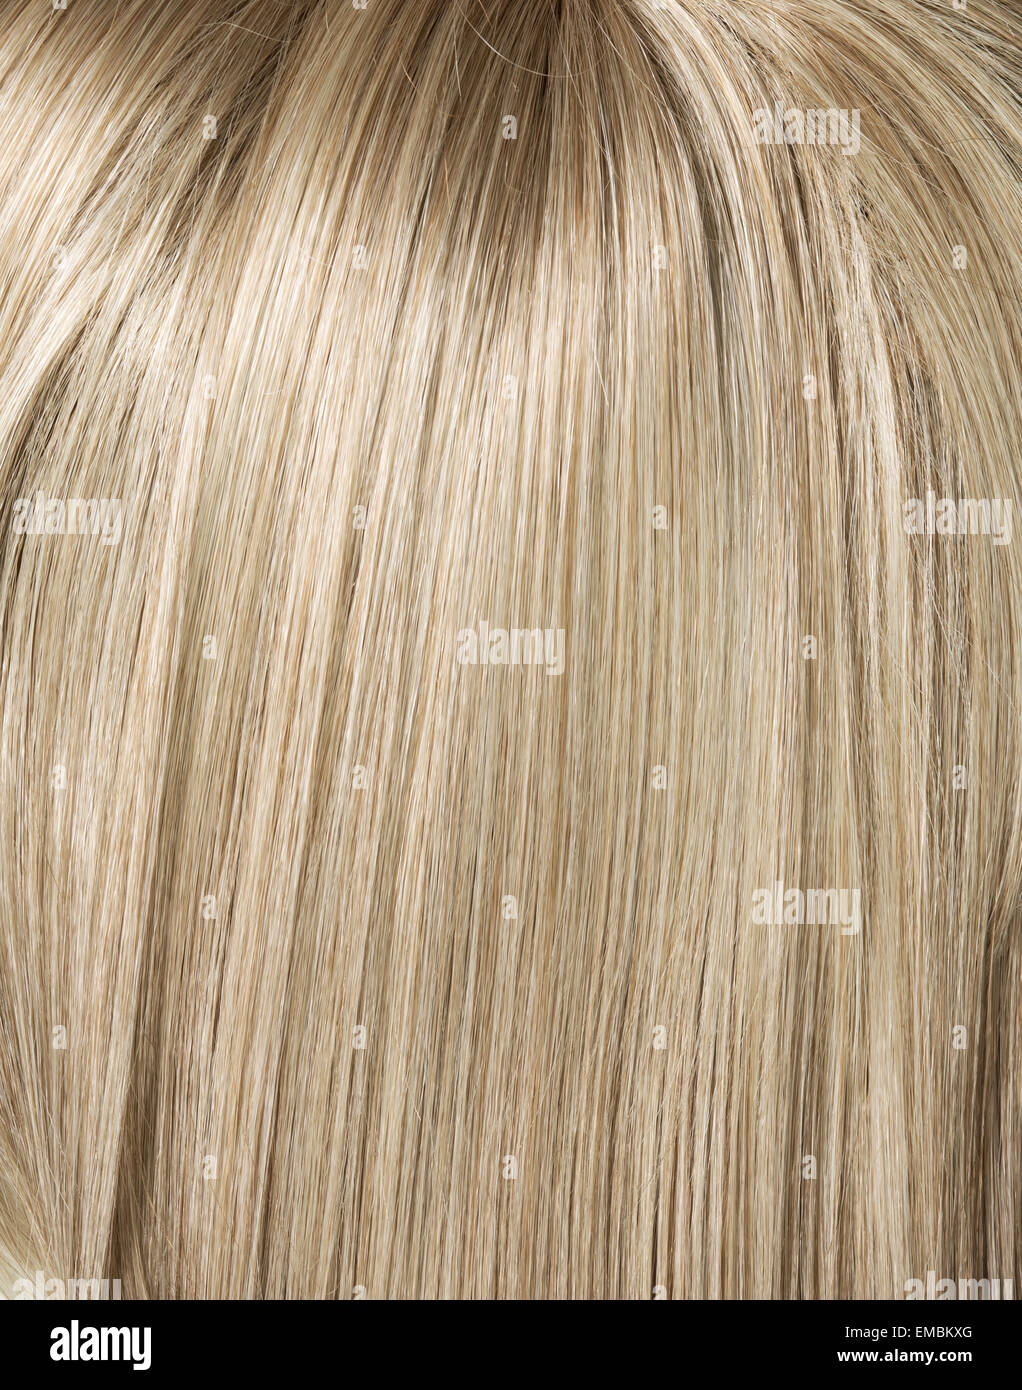 Picture of long, straight blond haircut Stock Photo